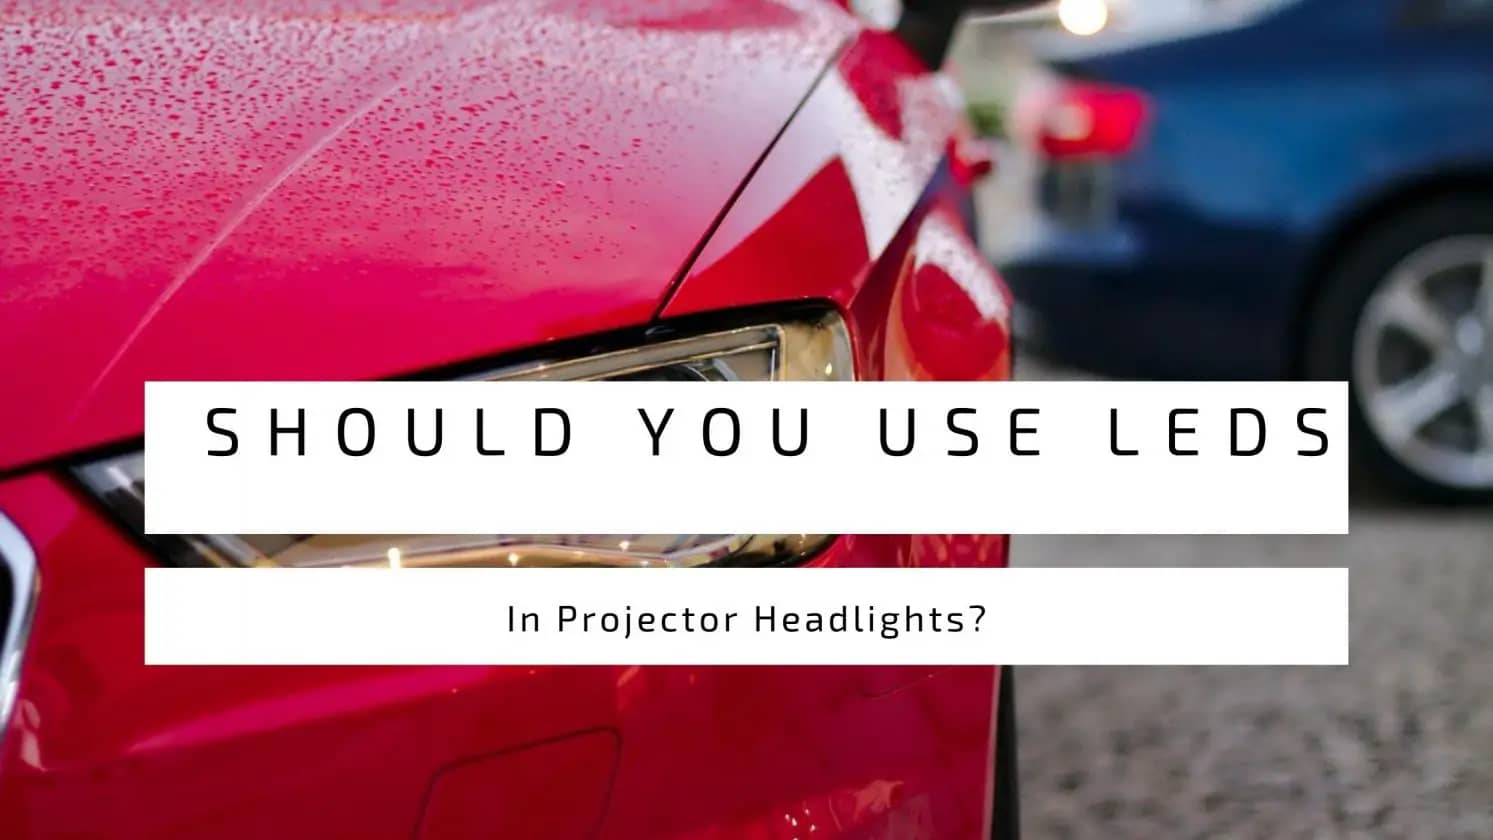 Should You Use LEDs In Projector Headlights?